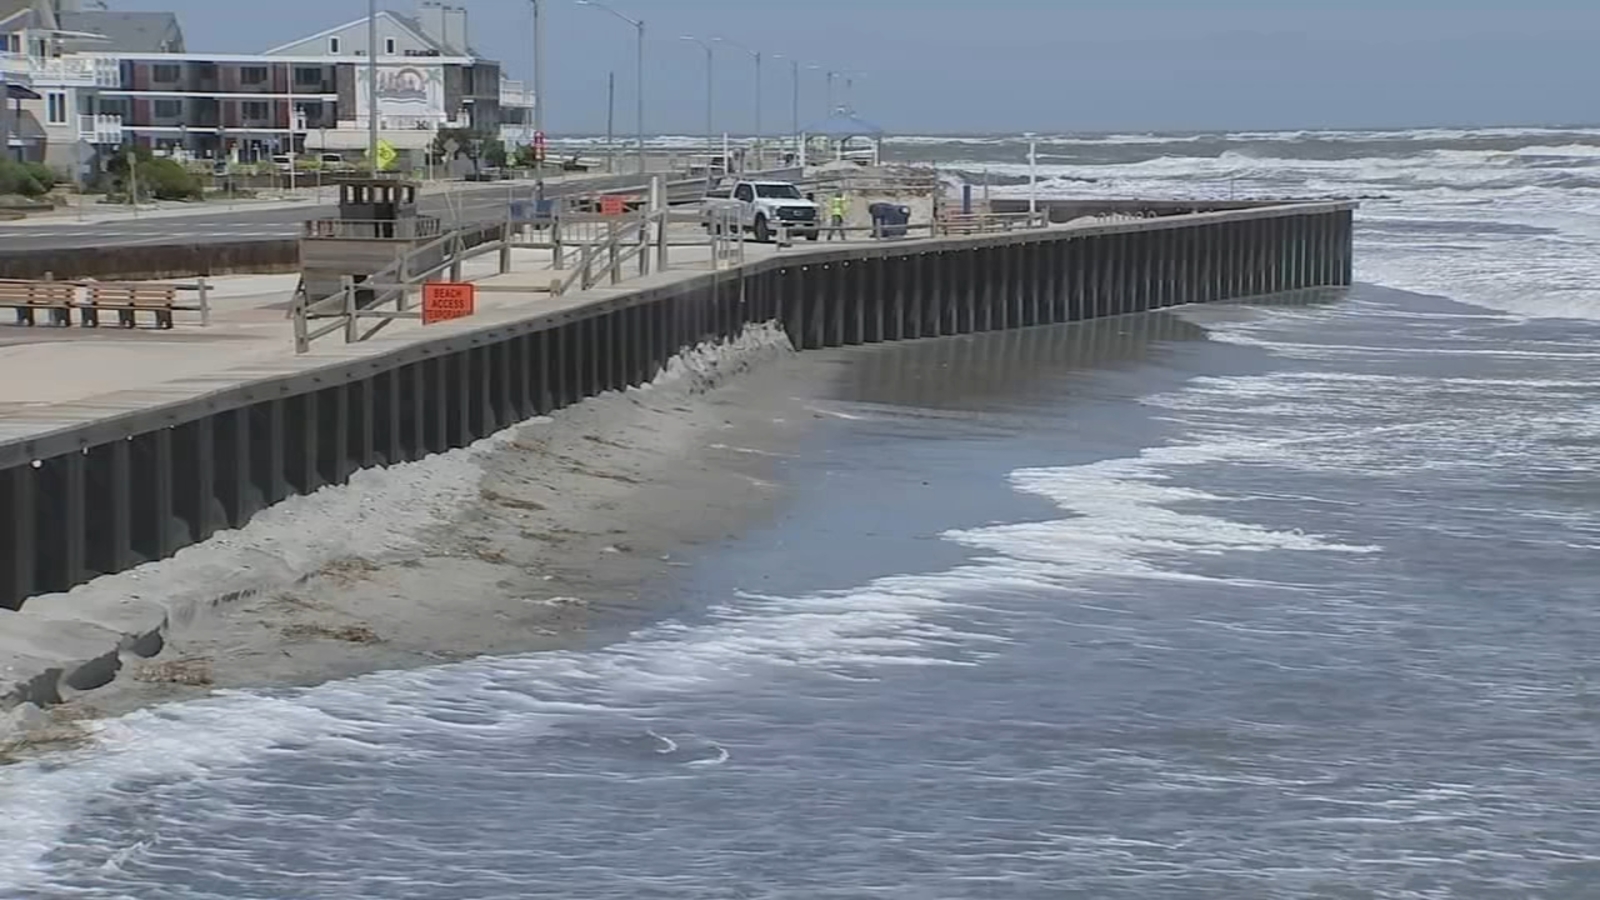 Nj storm damage shore towns assessing beach erosion after weekend weather